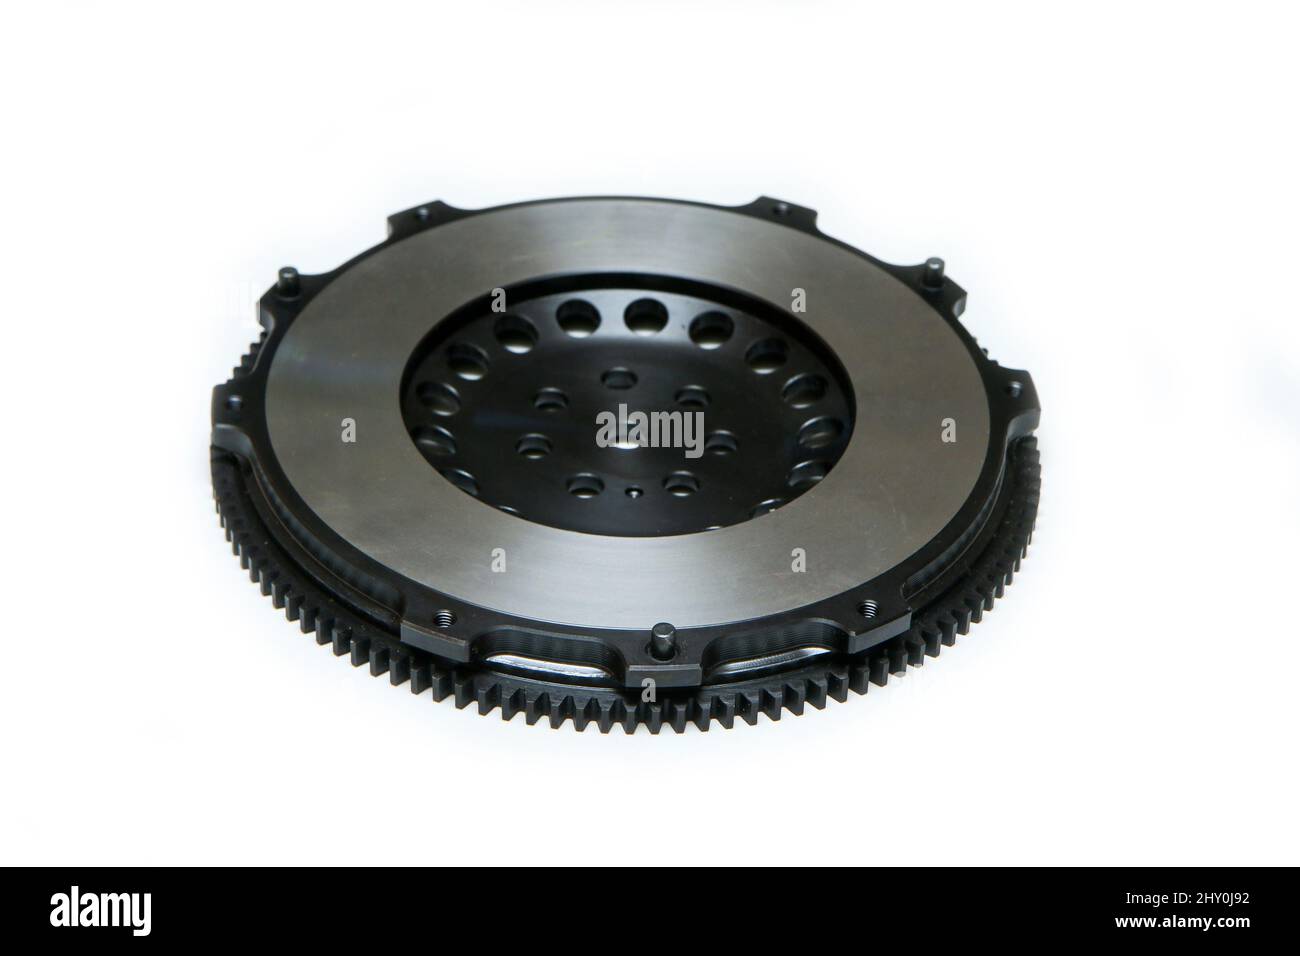 The shiny new lightweight engine flywheel isolated in a white background. Stock Photo